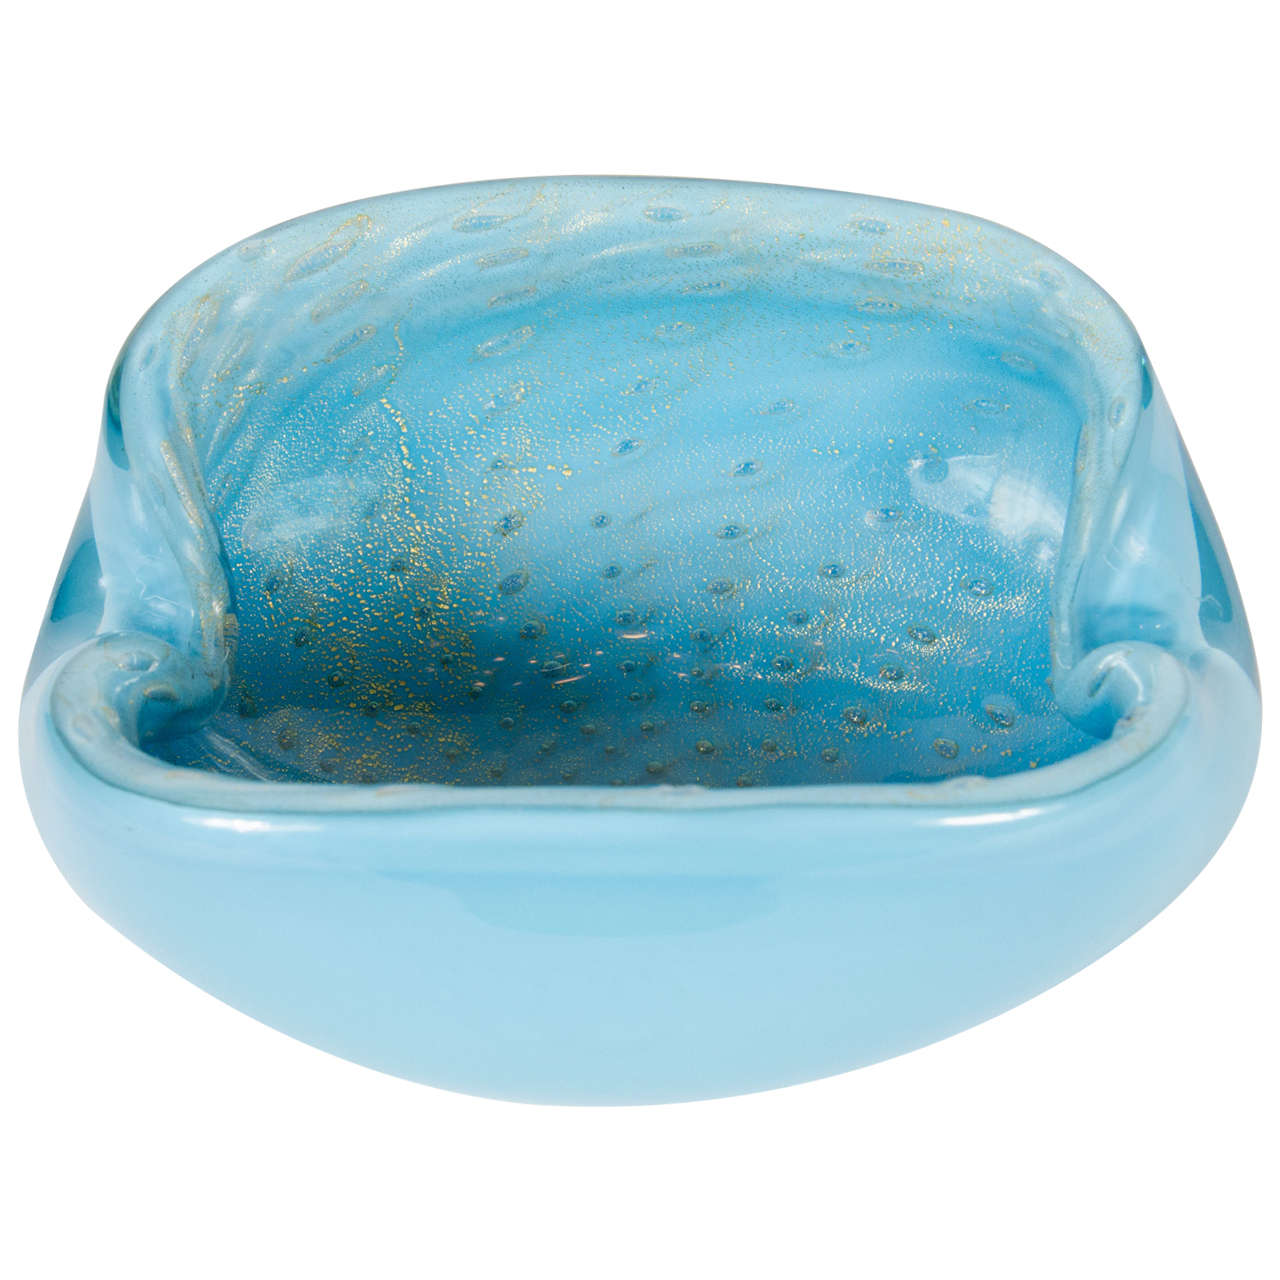 Hand-Blown Murano Glass Bowl with 24K Gold Flecks in Robins Egg Blue